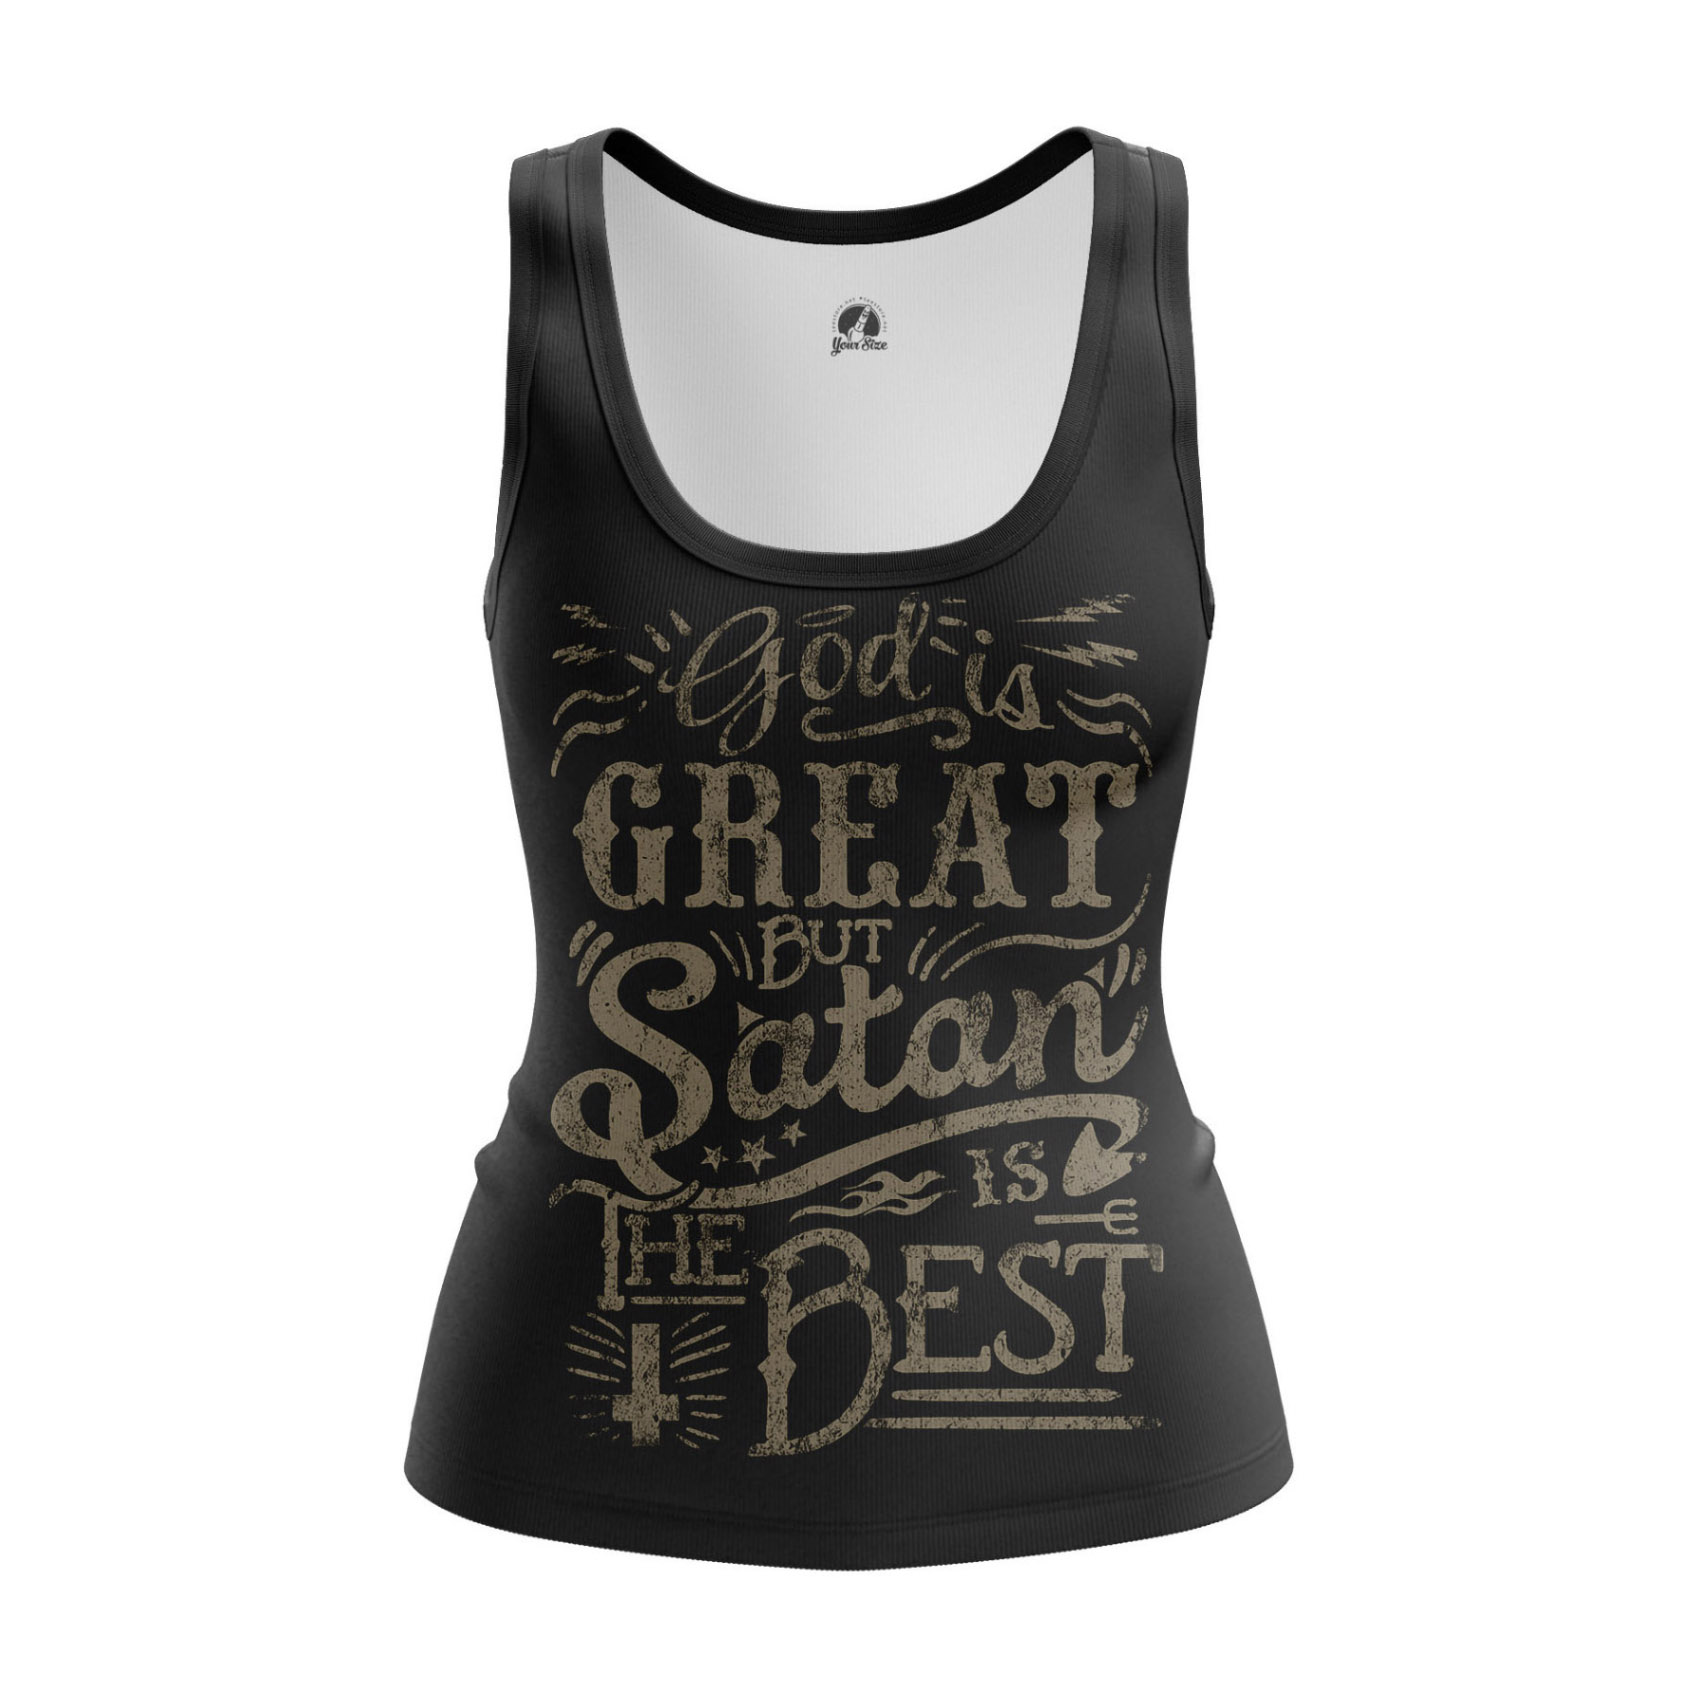 Women’s t-shirt God is great But Satan Best Phrase Idolstore - Merchandise and Collectibles Merchandise, Toys and Collectibles